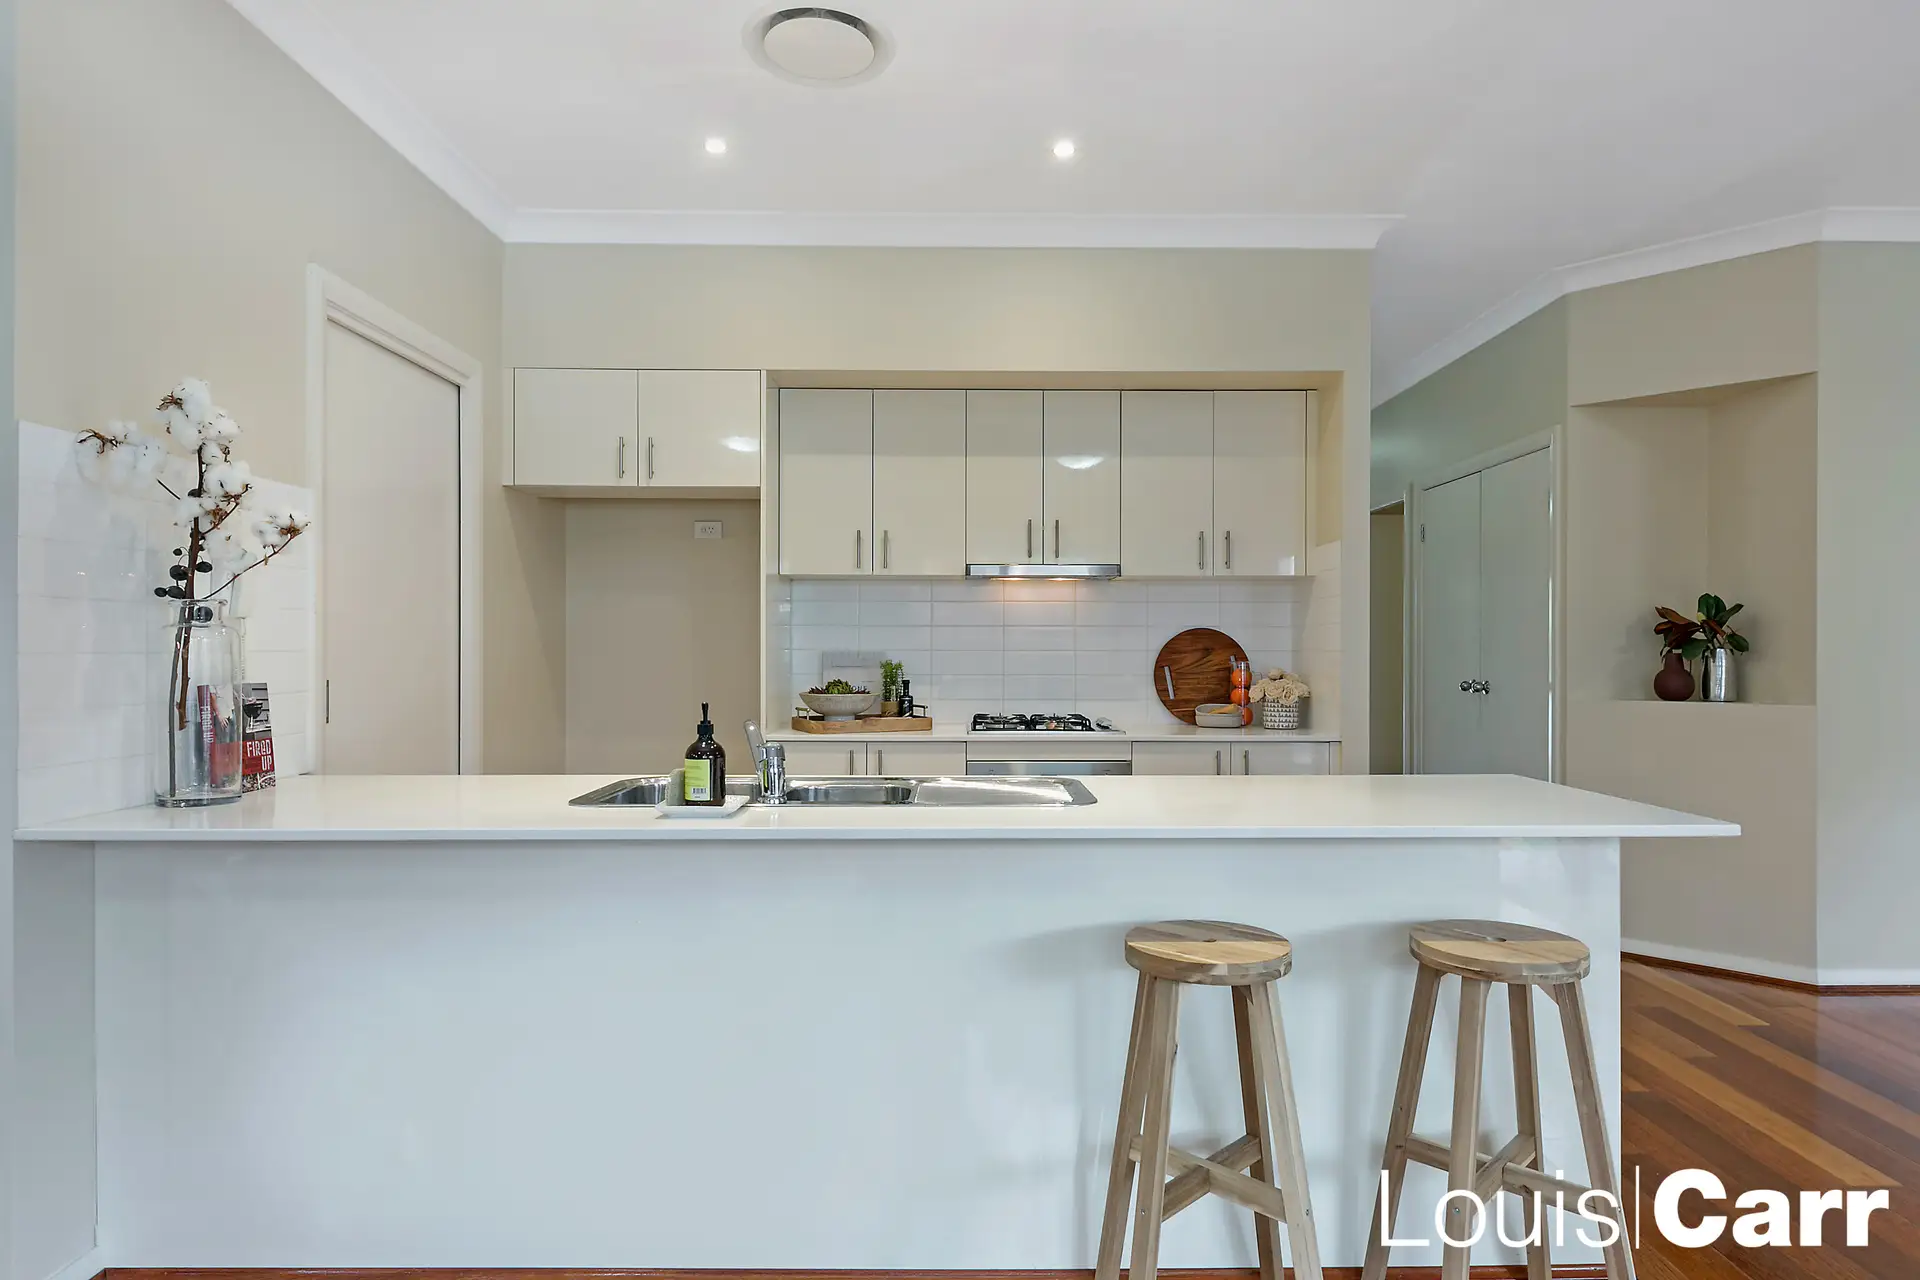 Photo #4: 7 Holly Street, Rouse Hill - Sold by Louis Carr Real Estate